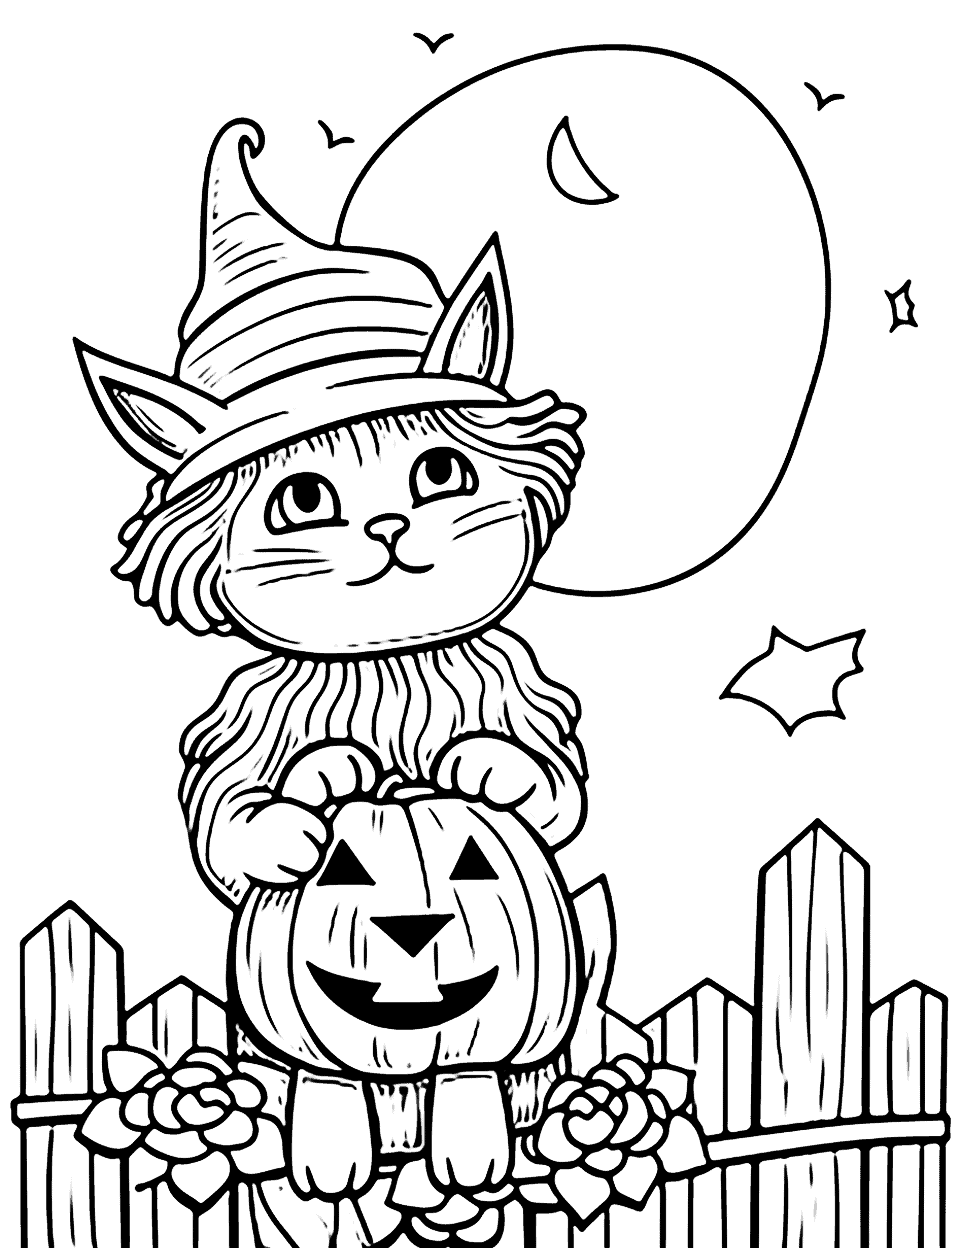 Moonlight Cat and Pumpkin Halloween Coloring Page - A cat sitting on a fence beside a carved pumpkin under a beautiful moonlit sky.